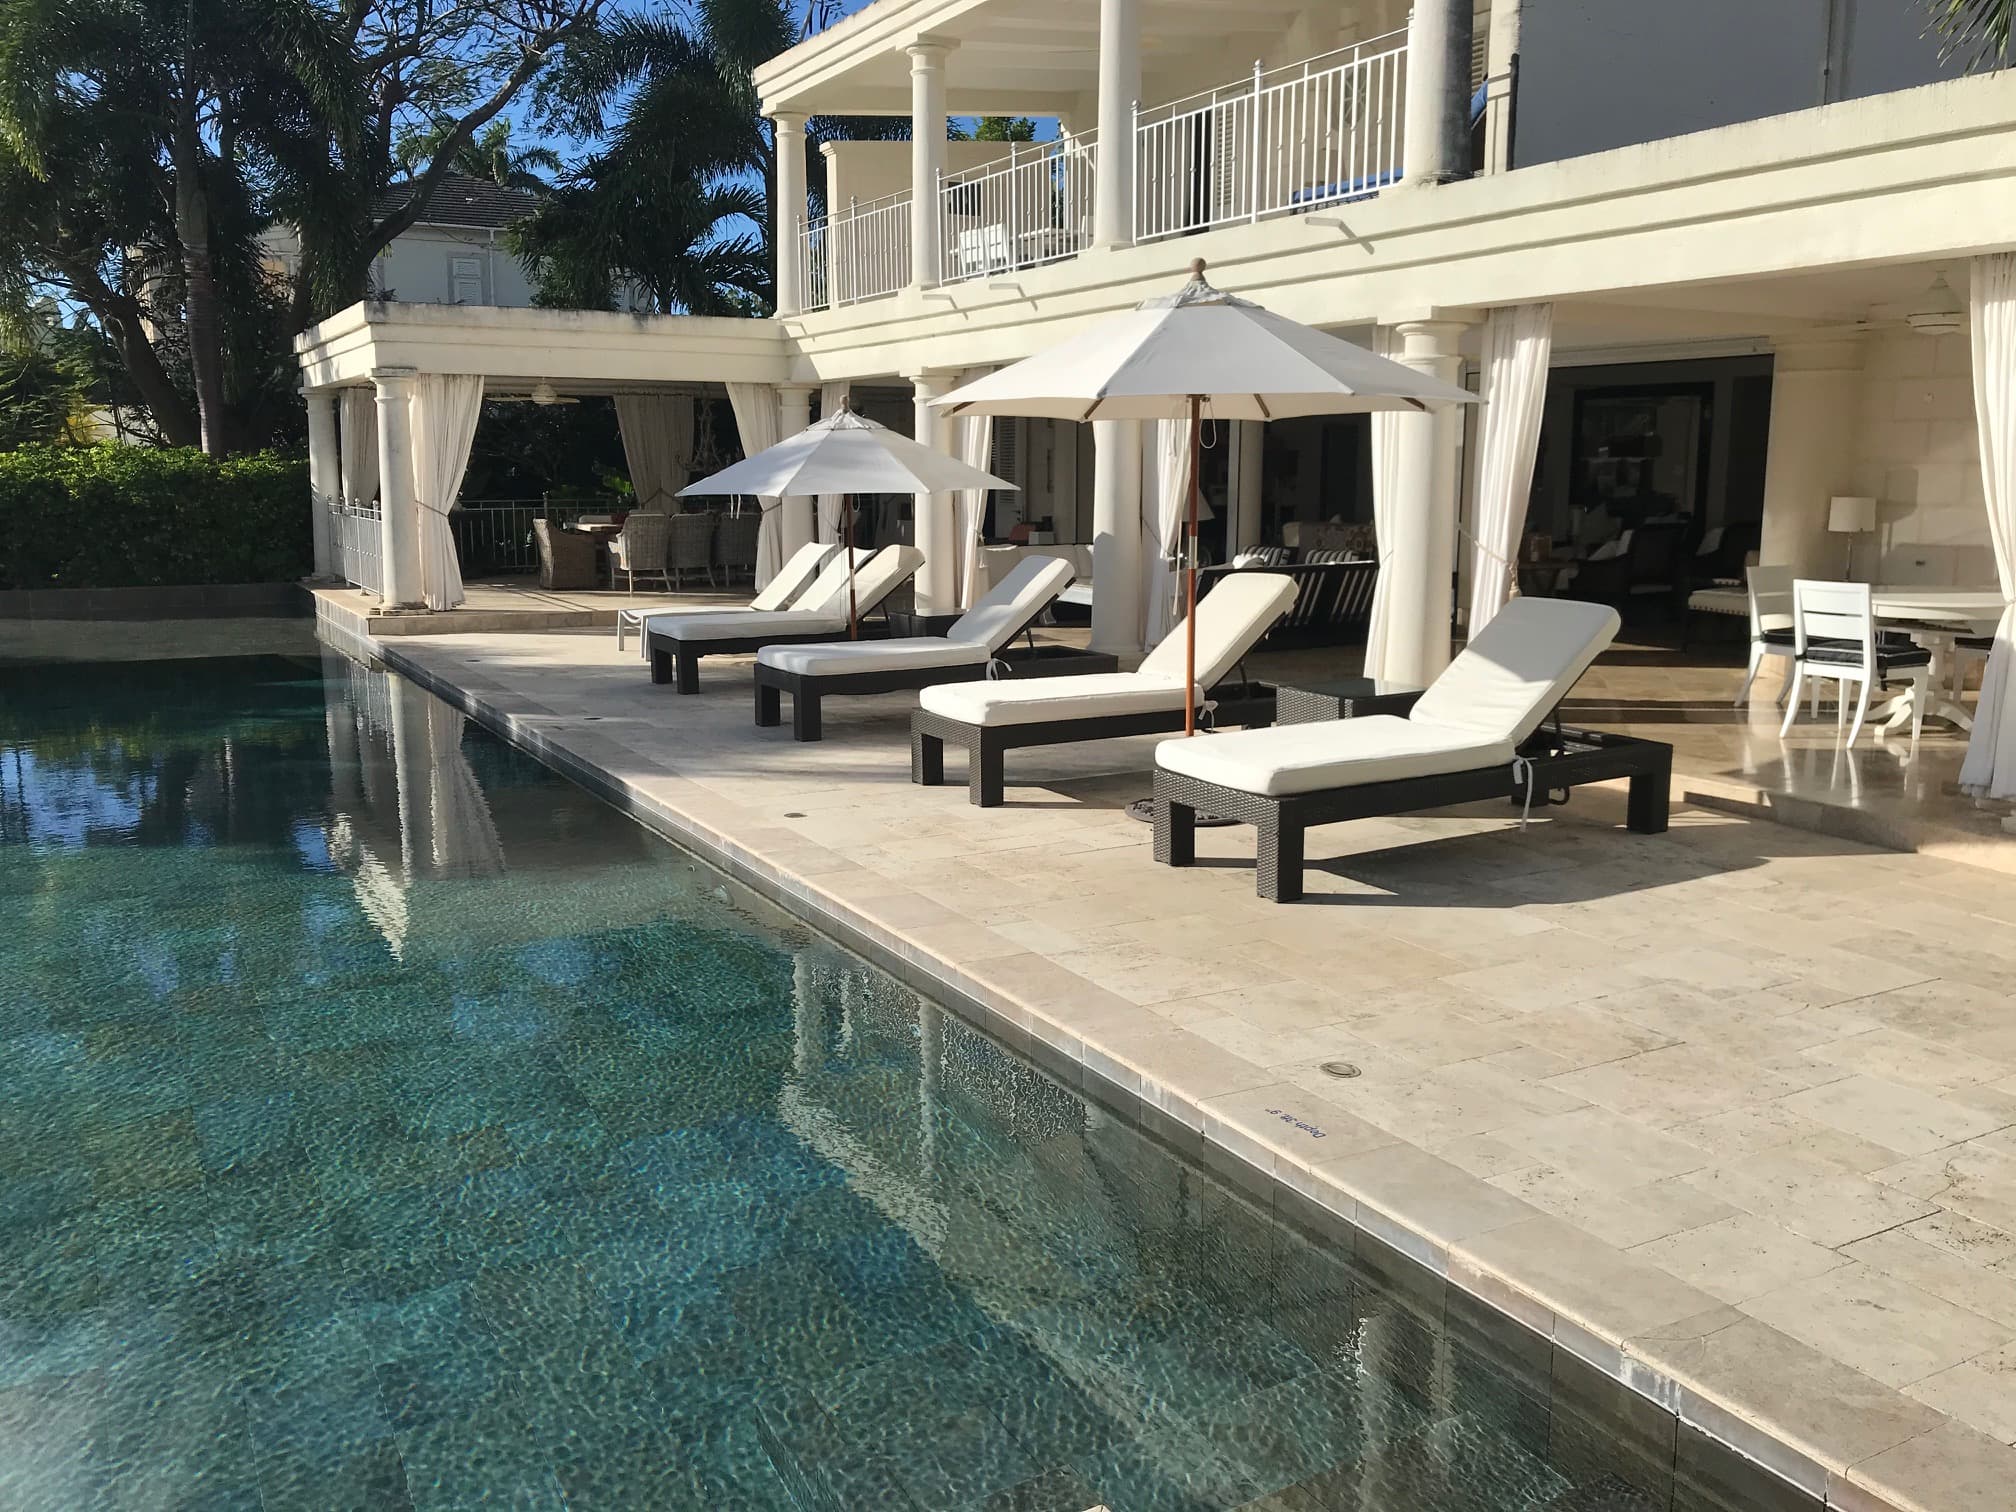 The poolside at Lelant, Barbados